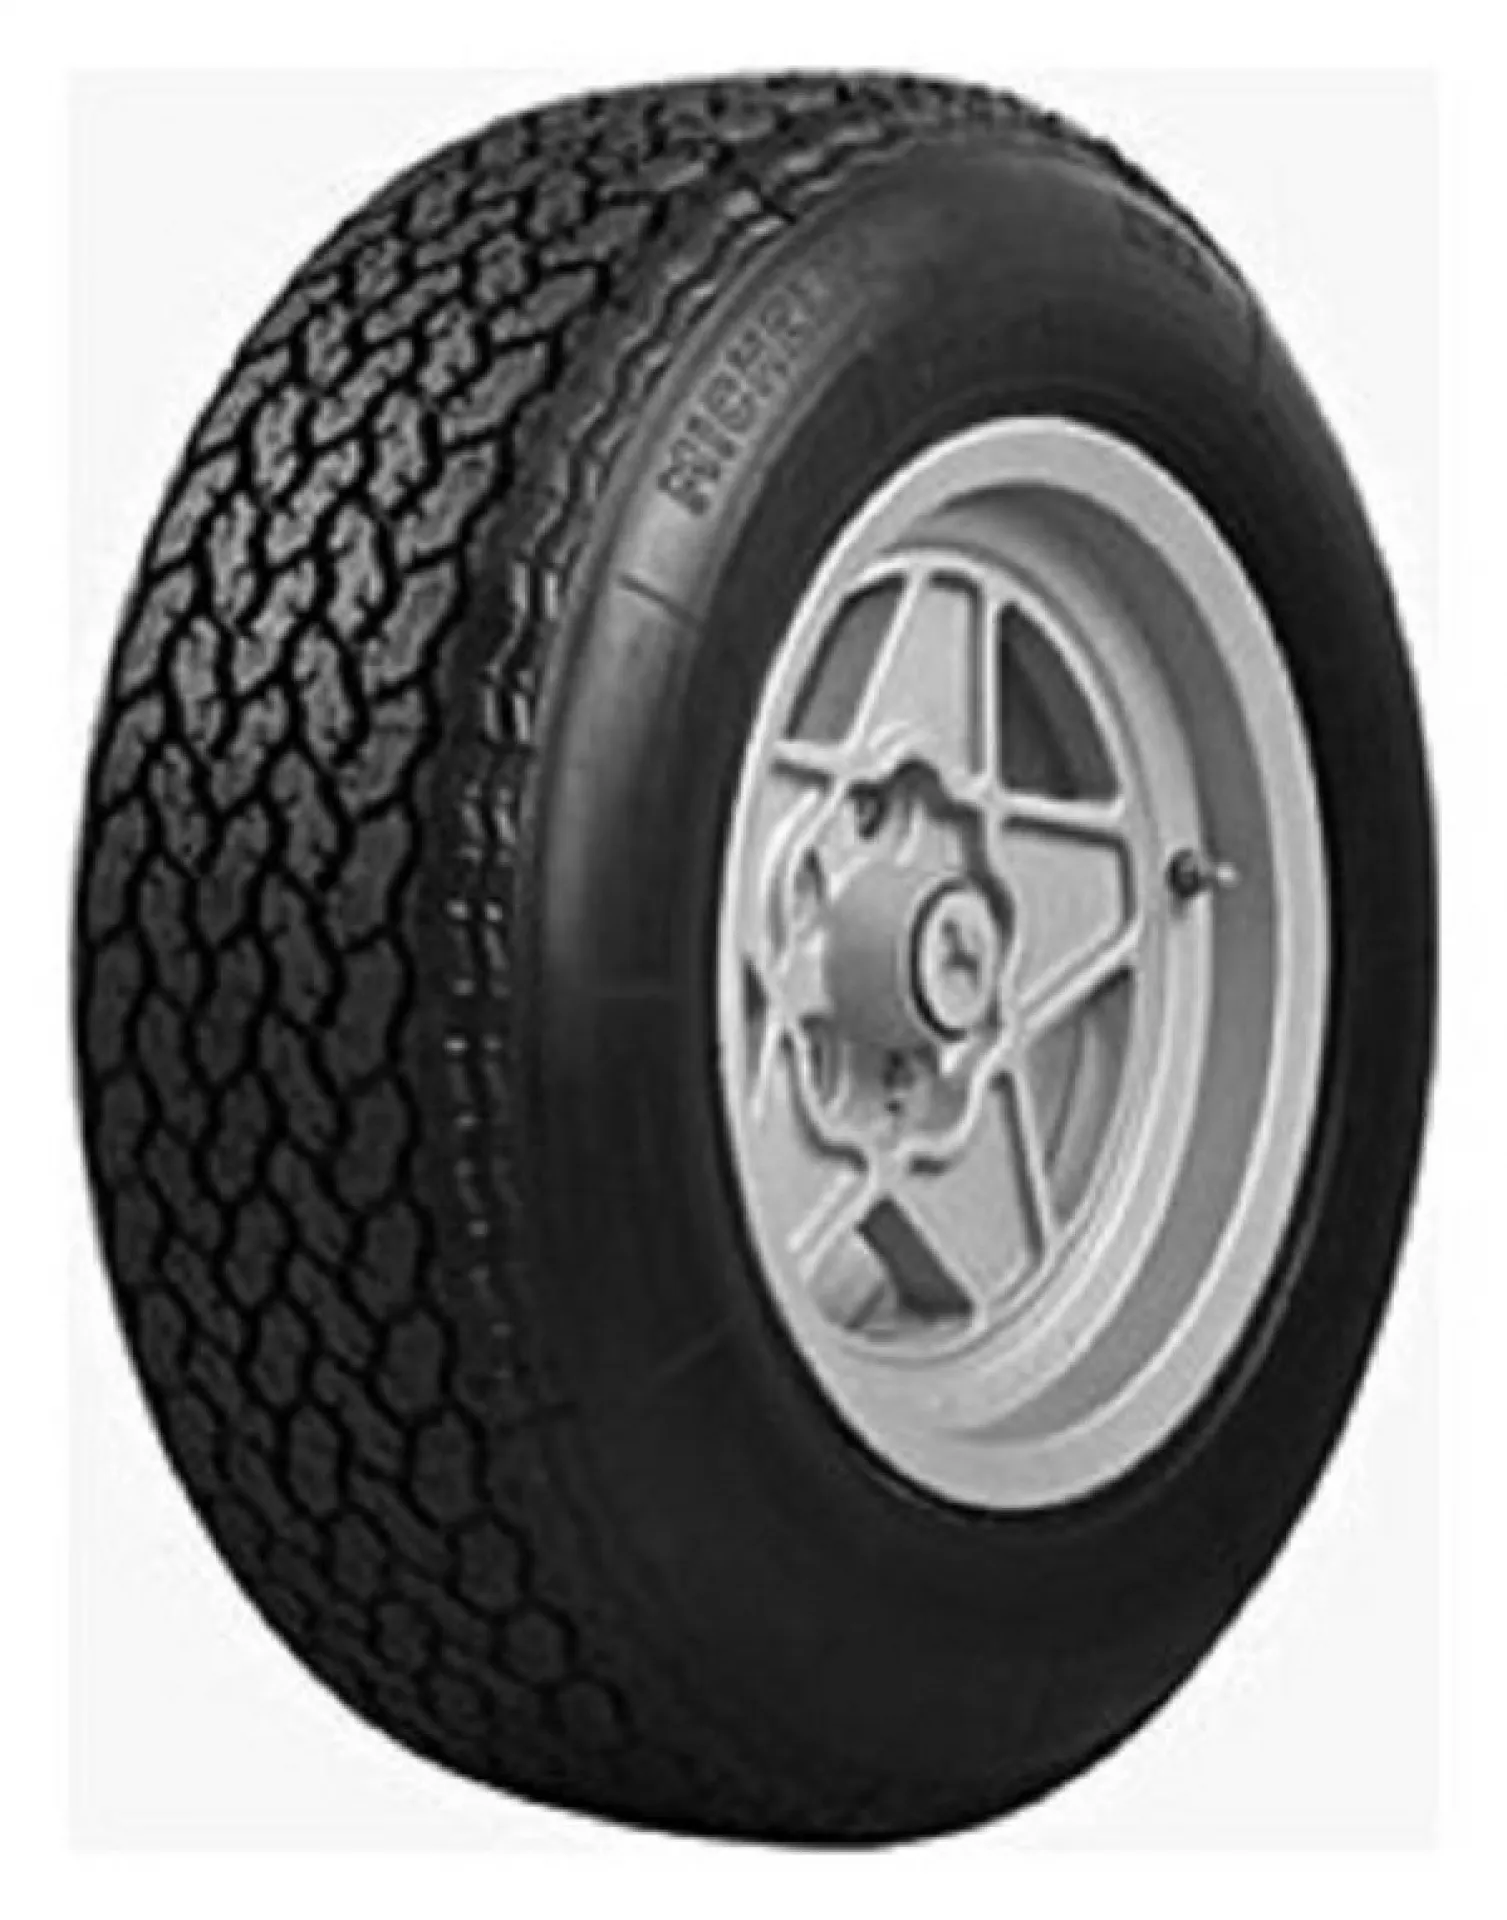 Michelin Collection XWX 205/70R14 89W